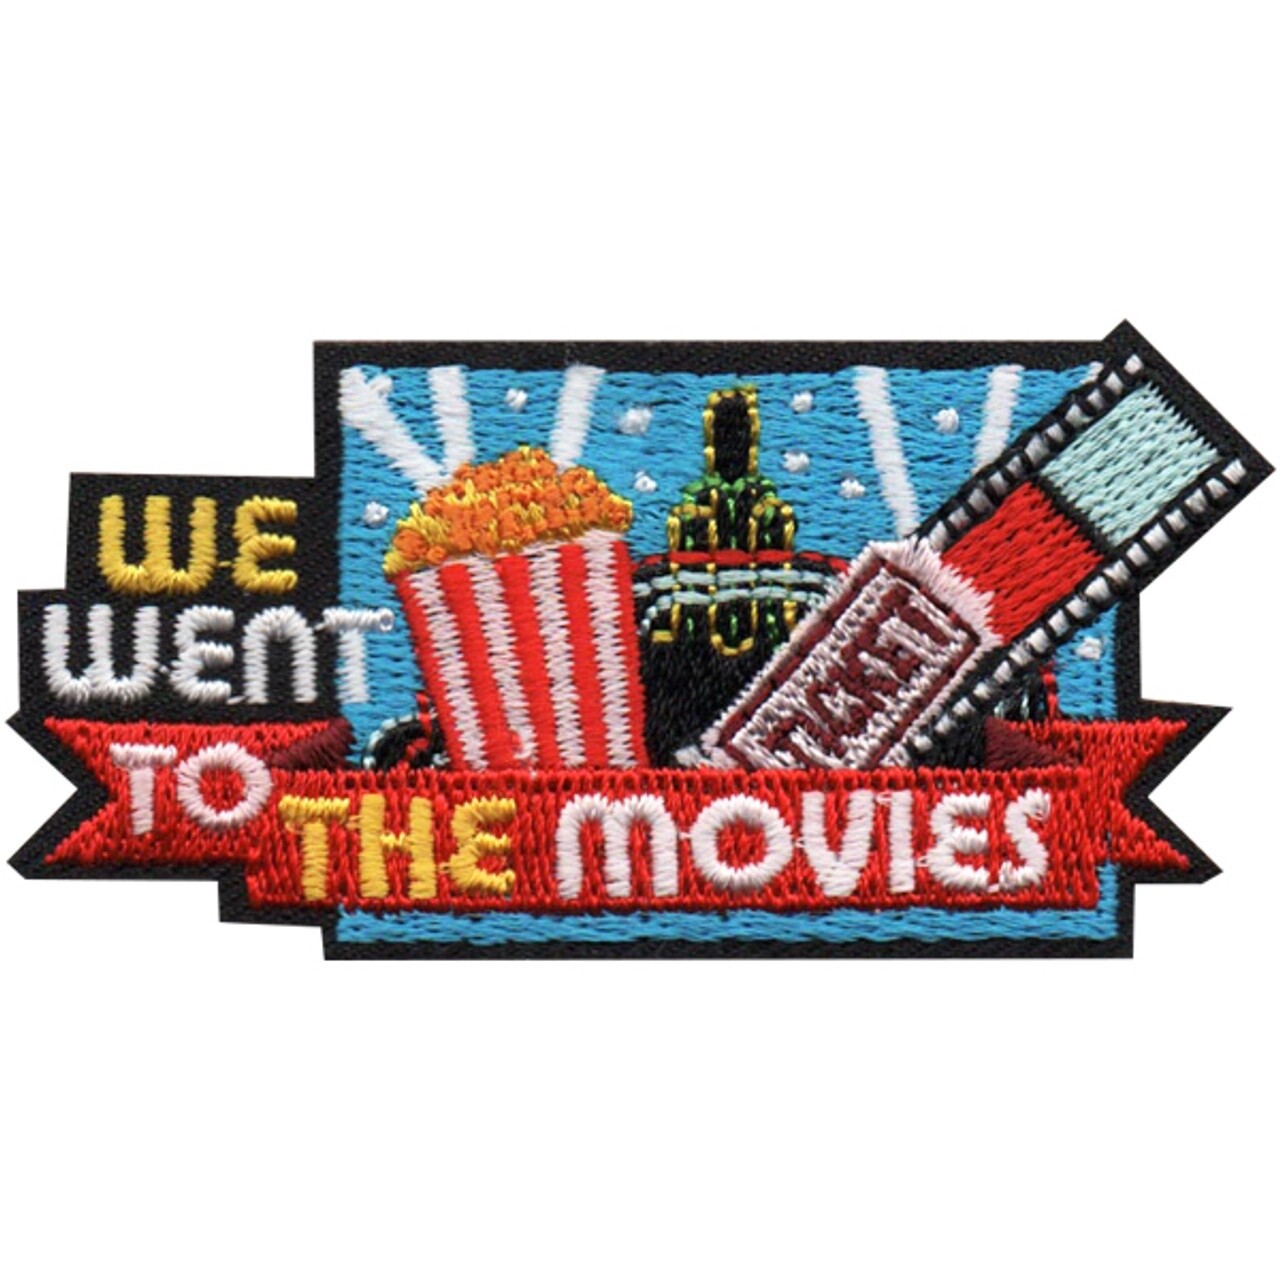 We Went to the Movies Patch